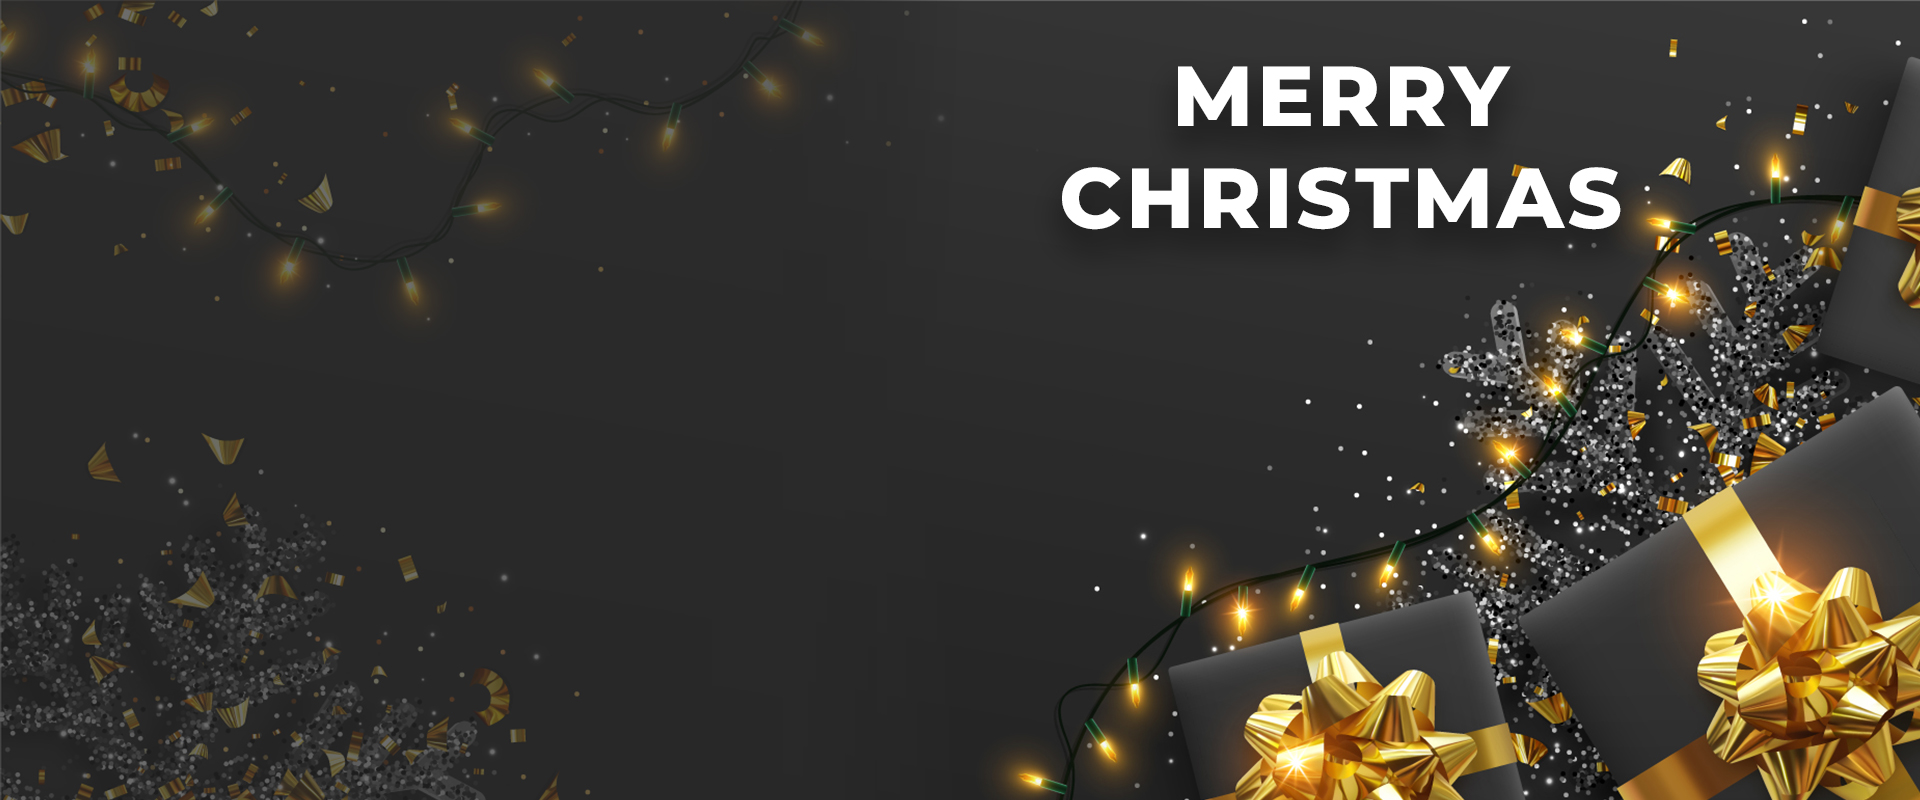 BUYINGGOLD.CH wishes you happy holidays!